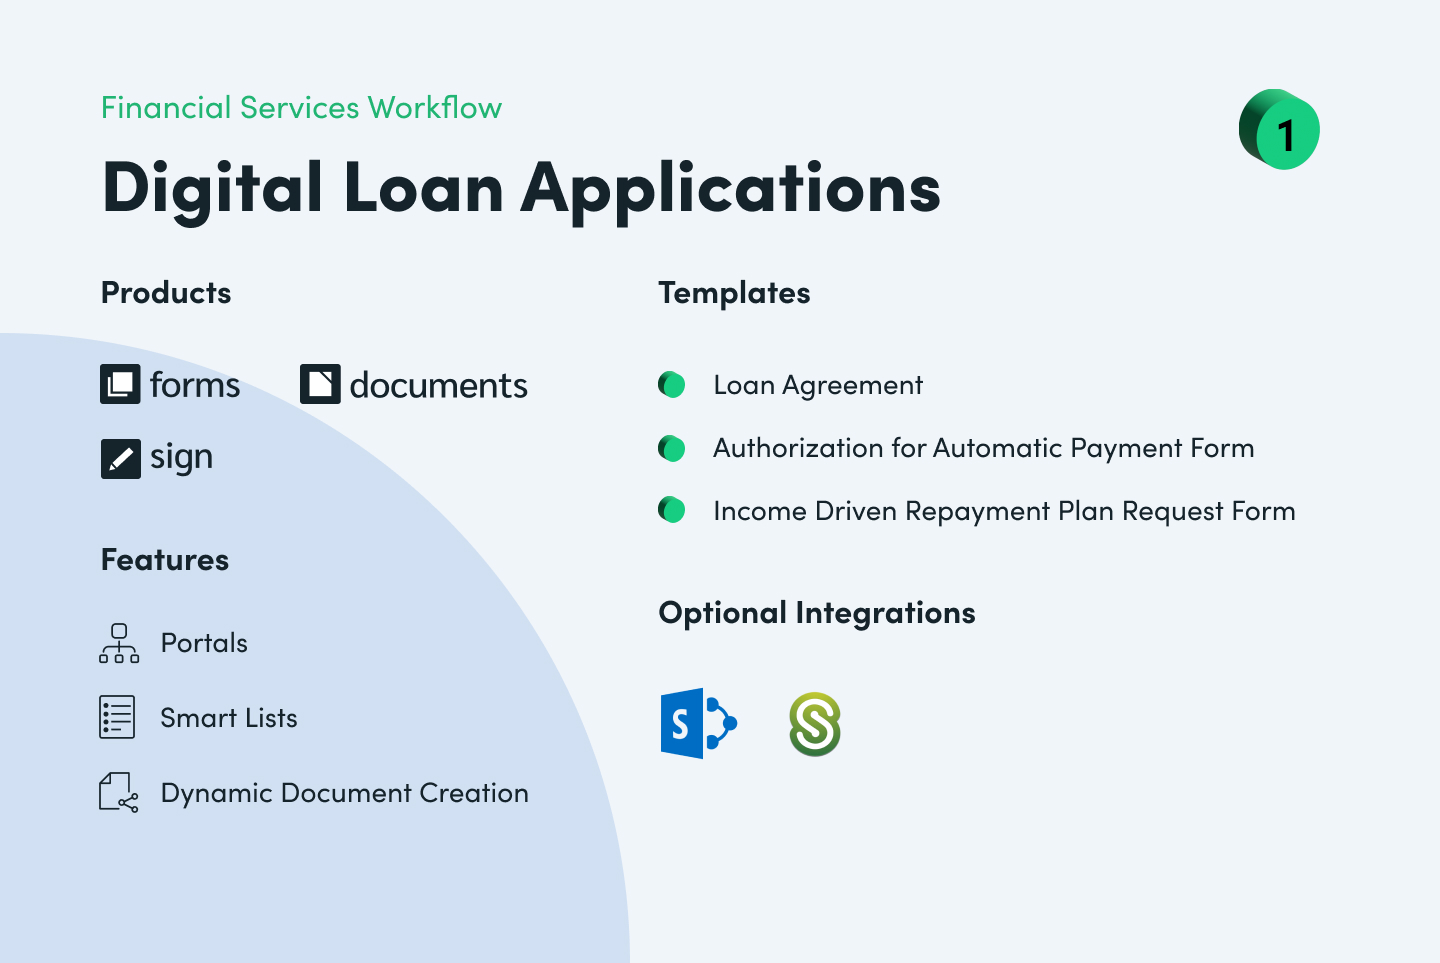 Financial Services Digital Loan Application Workflow Example